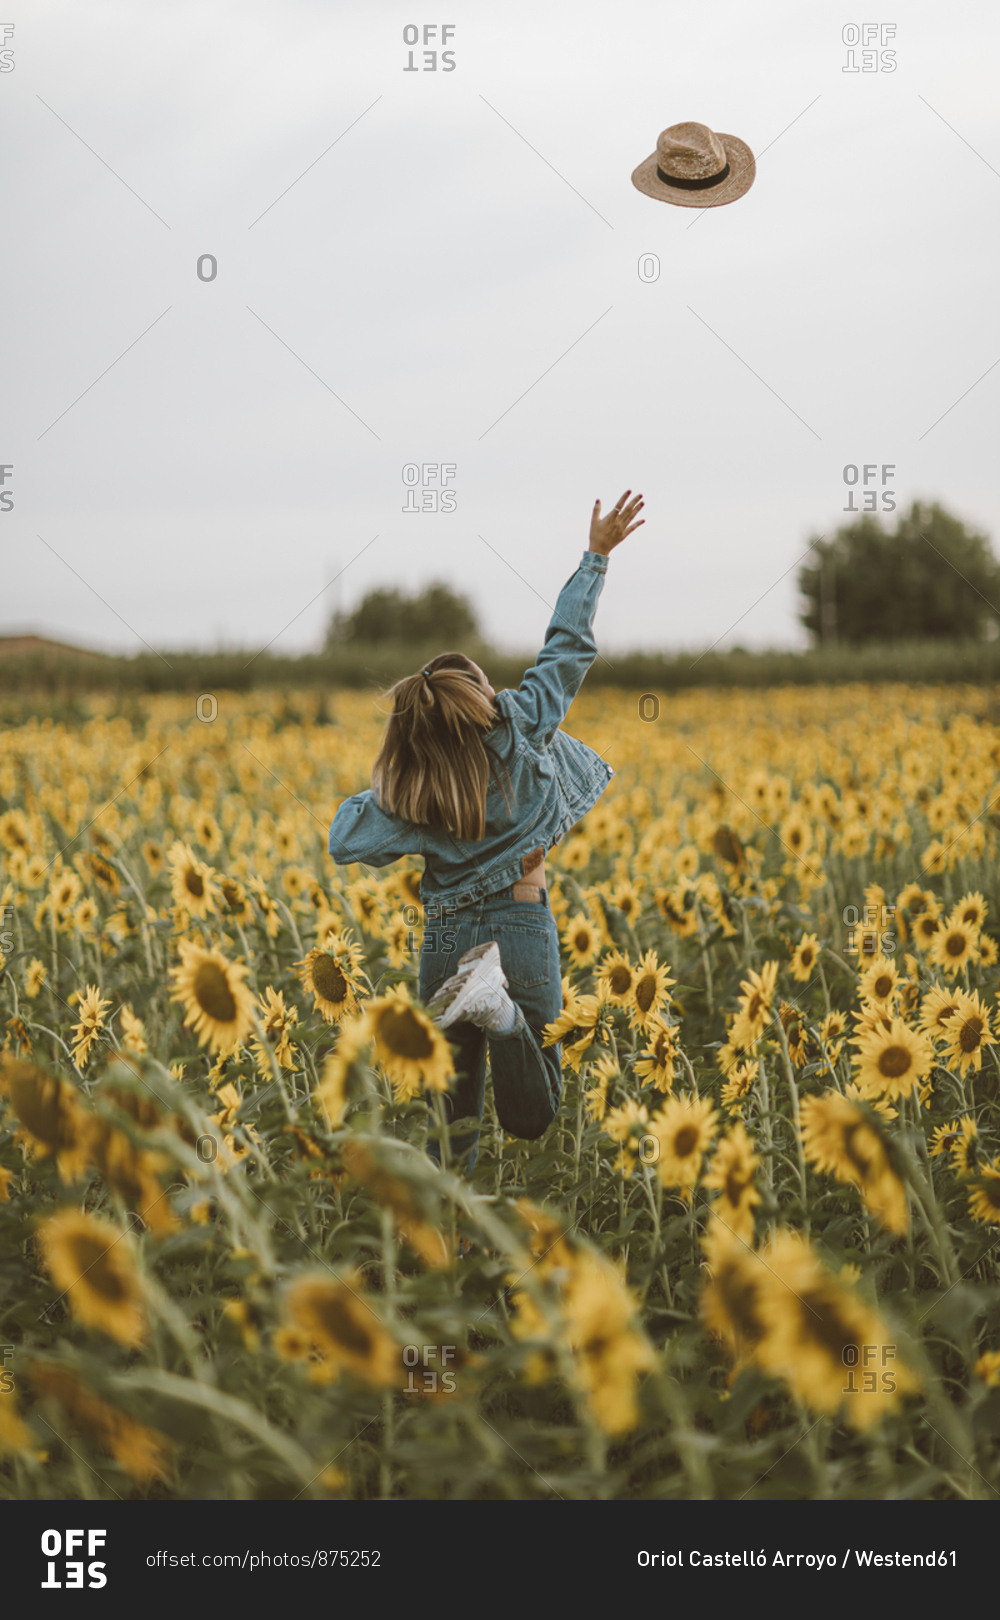 Rear View of young woman with blue denim jacket throwing a hat in a field of sunflowers